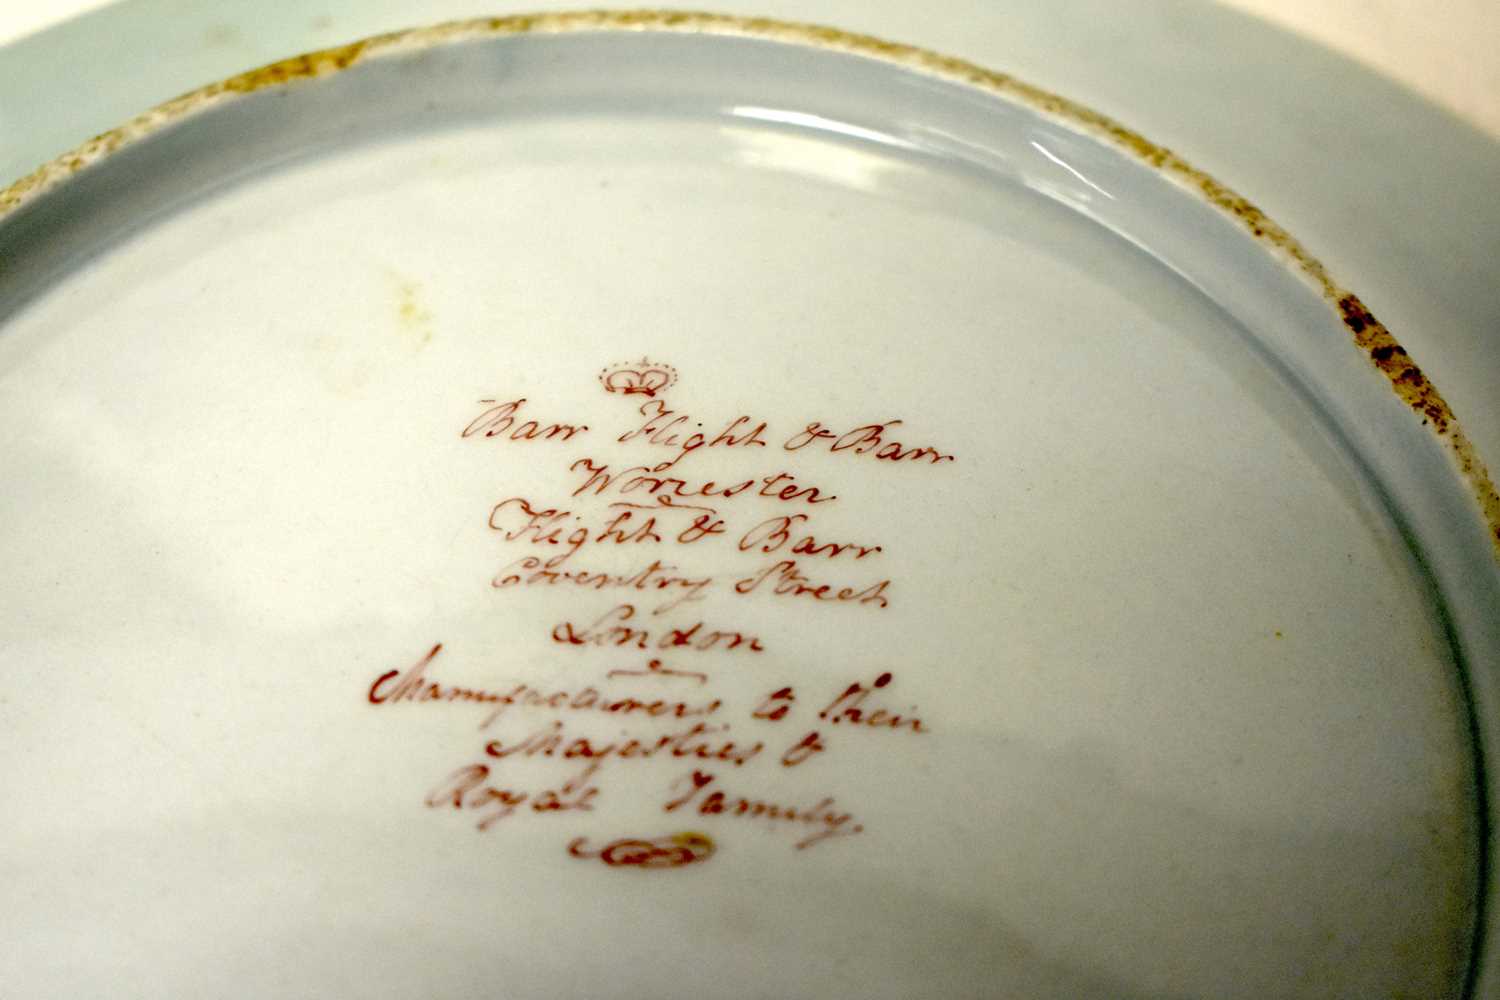 A LATE 18TH CENTURY GROUP OF BARR FLIGHT AND BARR PORCELAIN WARES painted with armorials on a - Image 20 of 31